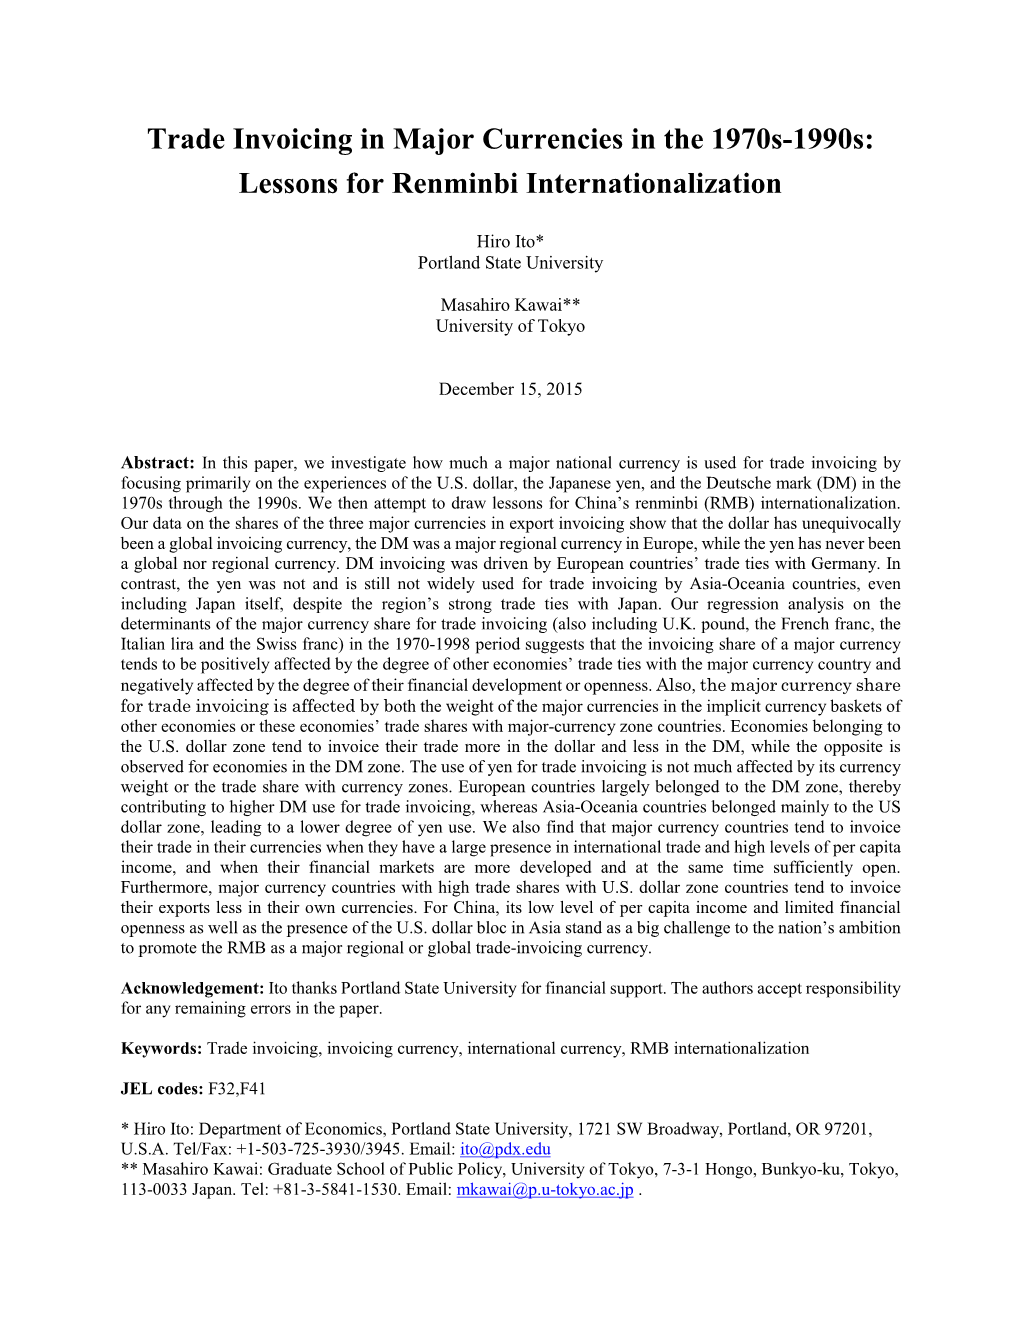 Trade Invoicing in Major Currencies in the 1970S-1990S: Lessons for Renminbi Internationalization